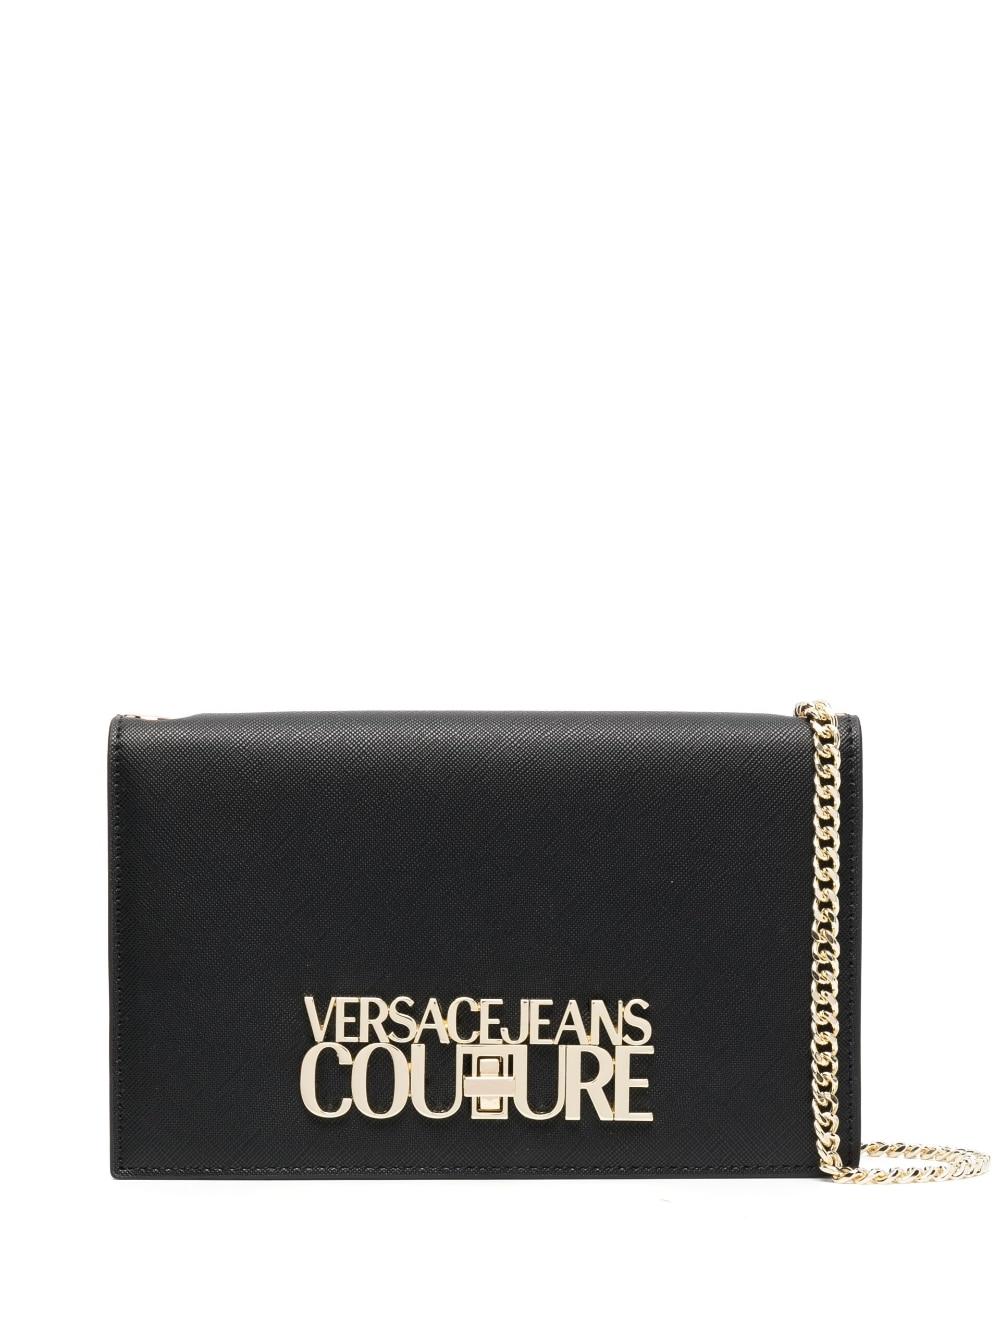 Versace Jeans Couture Logo-plaque Detail Crossbody Bag in Black | Lyst